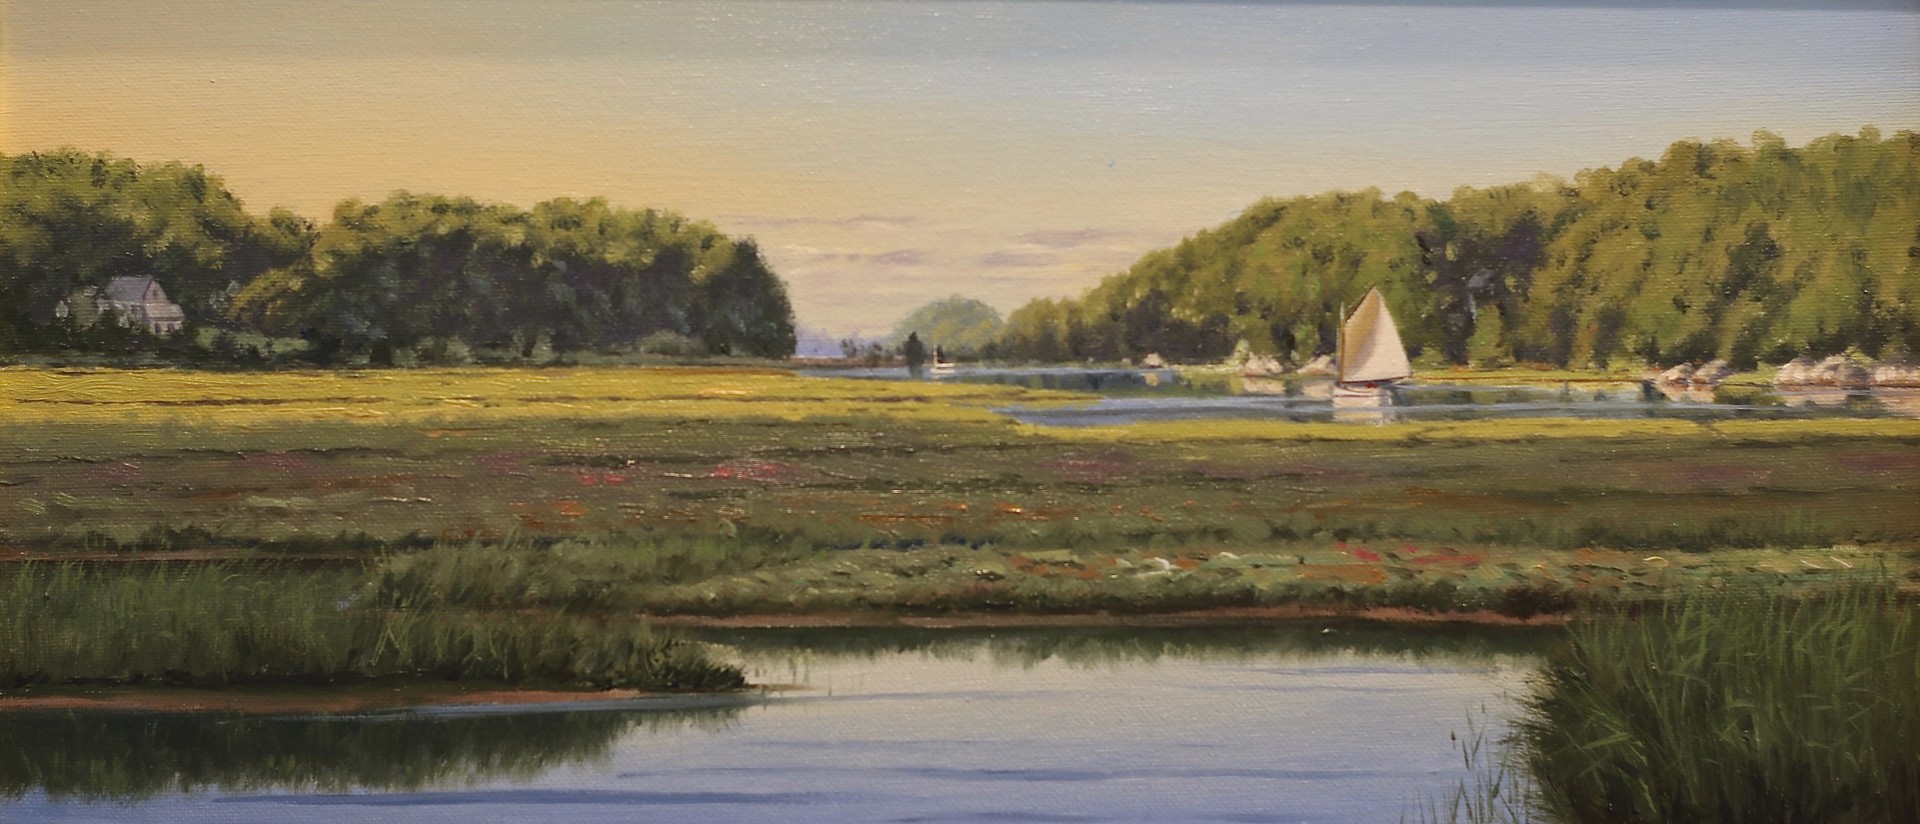 Light Across the Marsh, Cohasset, MA by Sergio Roffo